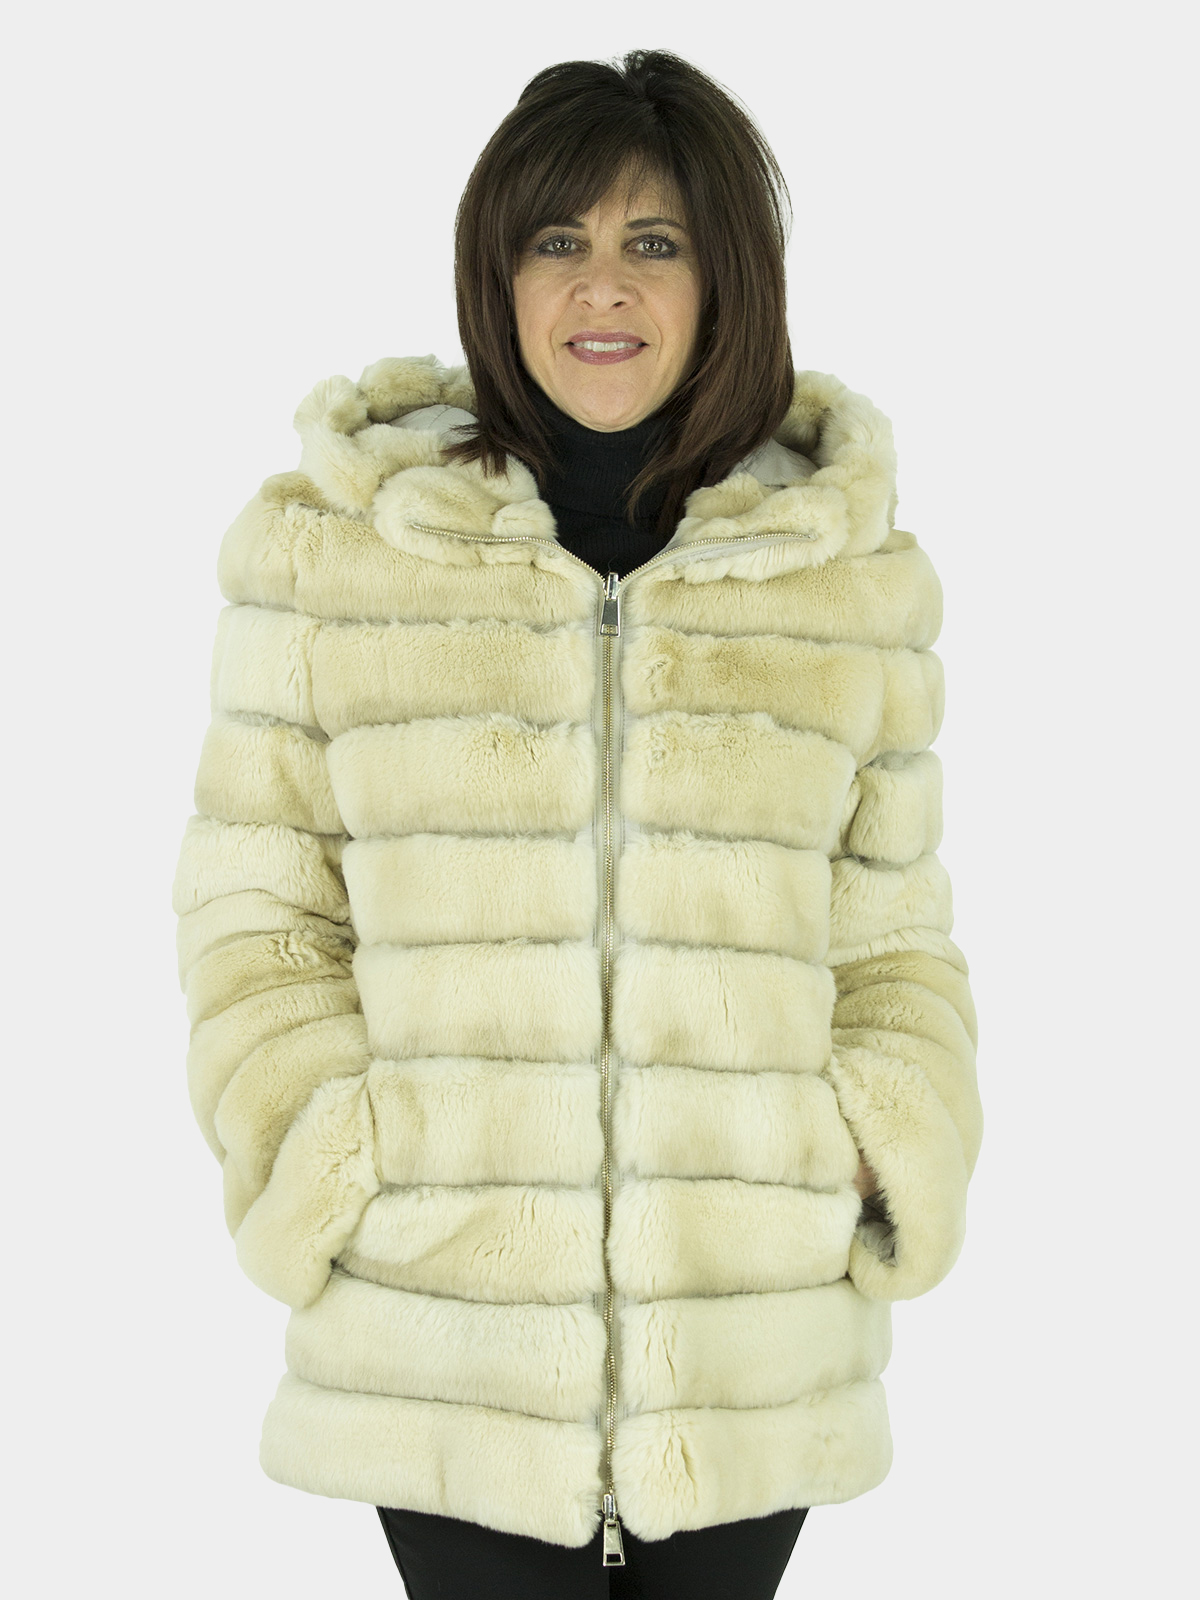 Woman' Rex Rabbit Fur Jacket Reversible to Quilted Silver Grey Fabric